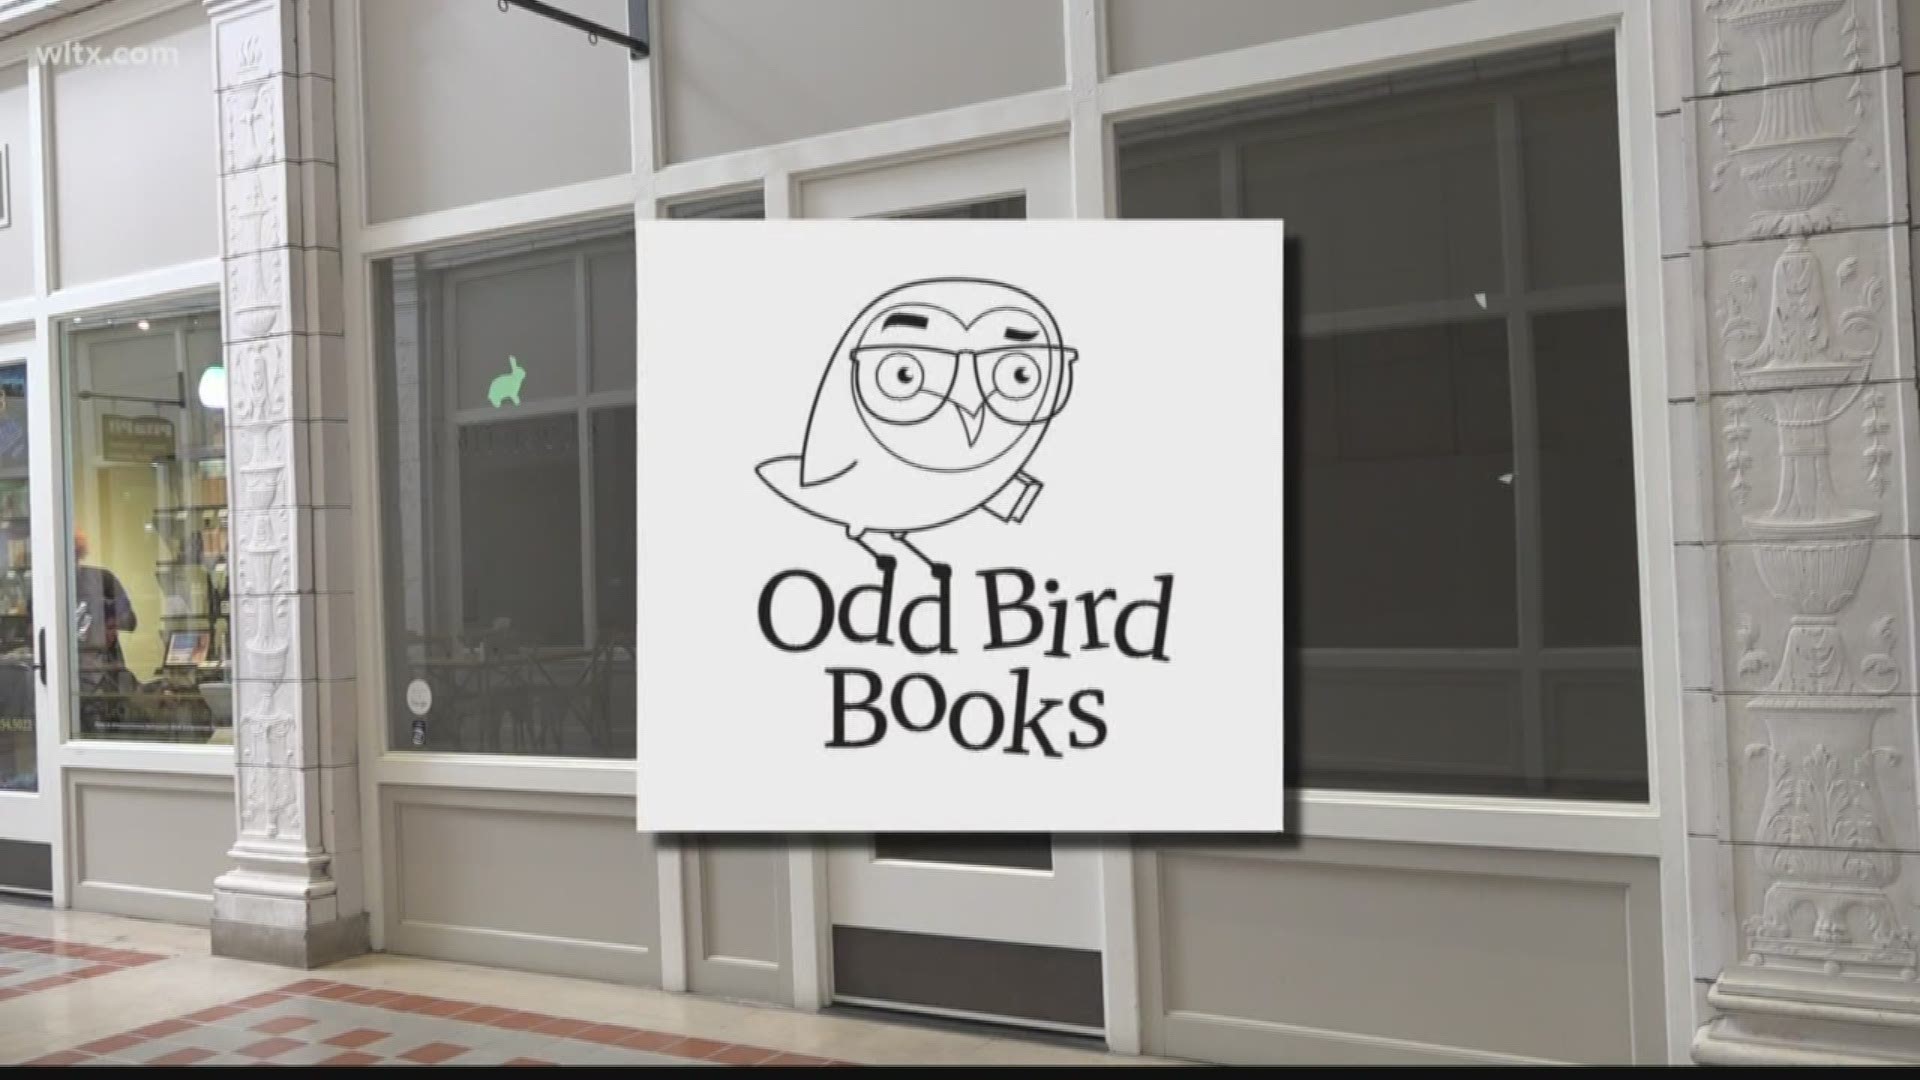 Joining the Arcade Mall soon will be Odd Bird Books, an independent, general interest book store.